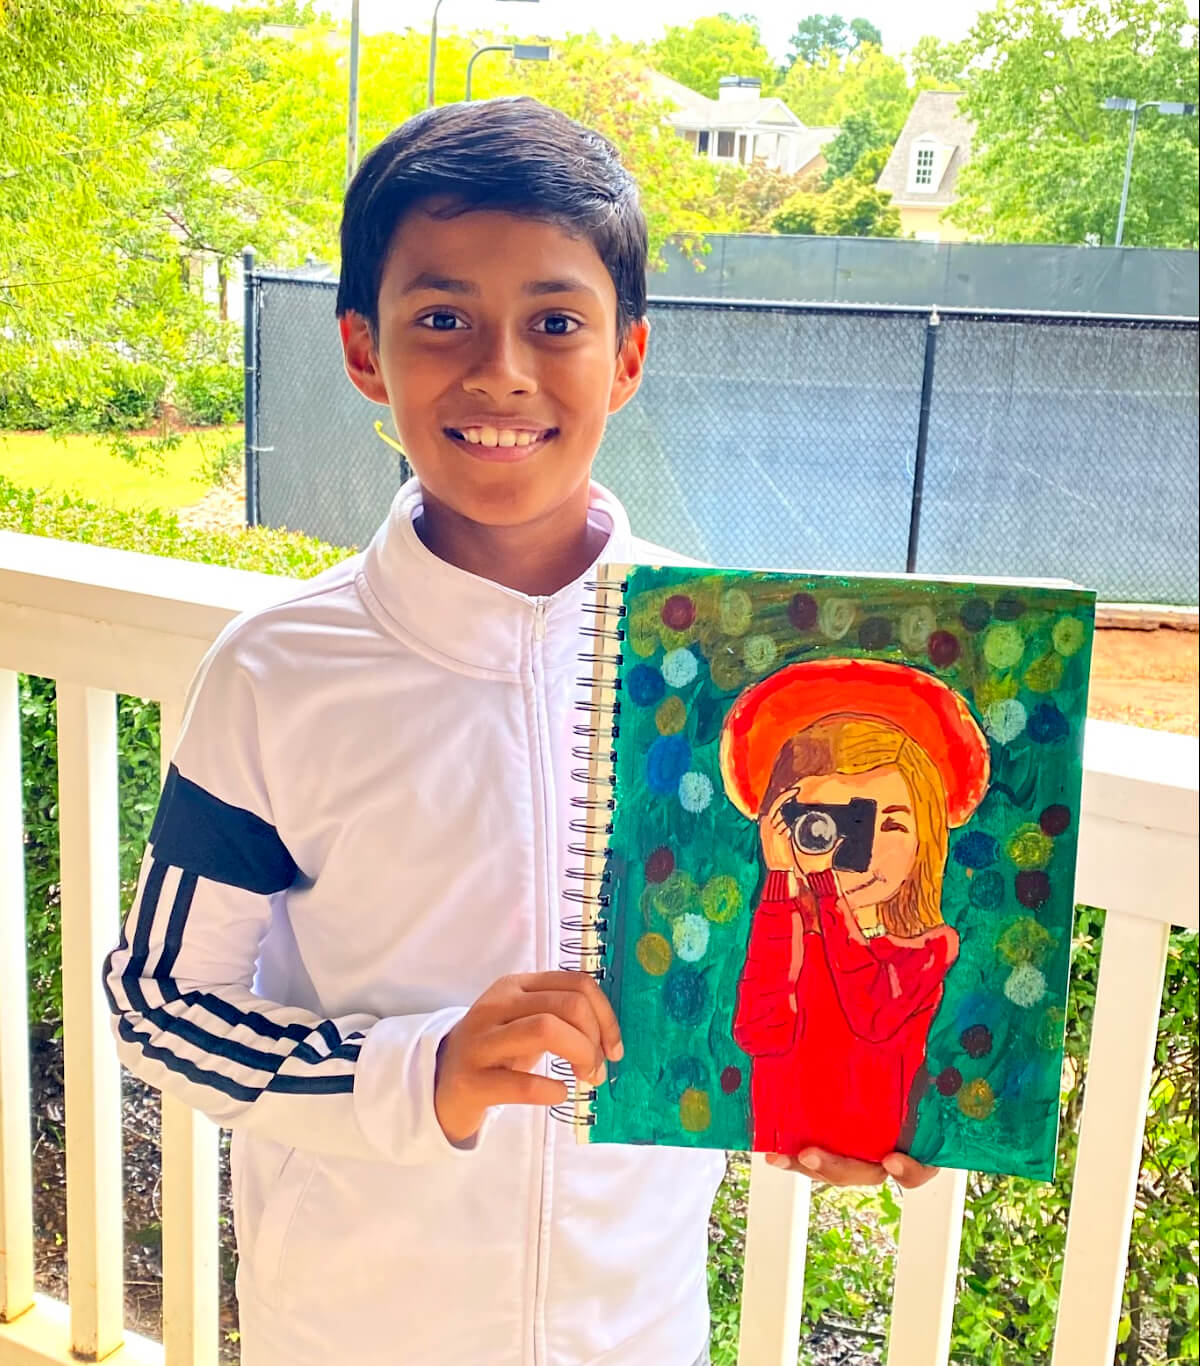 Young artist smiling and holding his acrylic painting titled "Say Cheese!